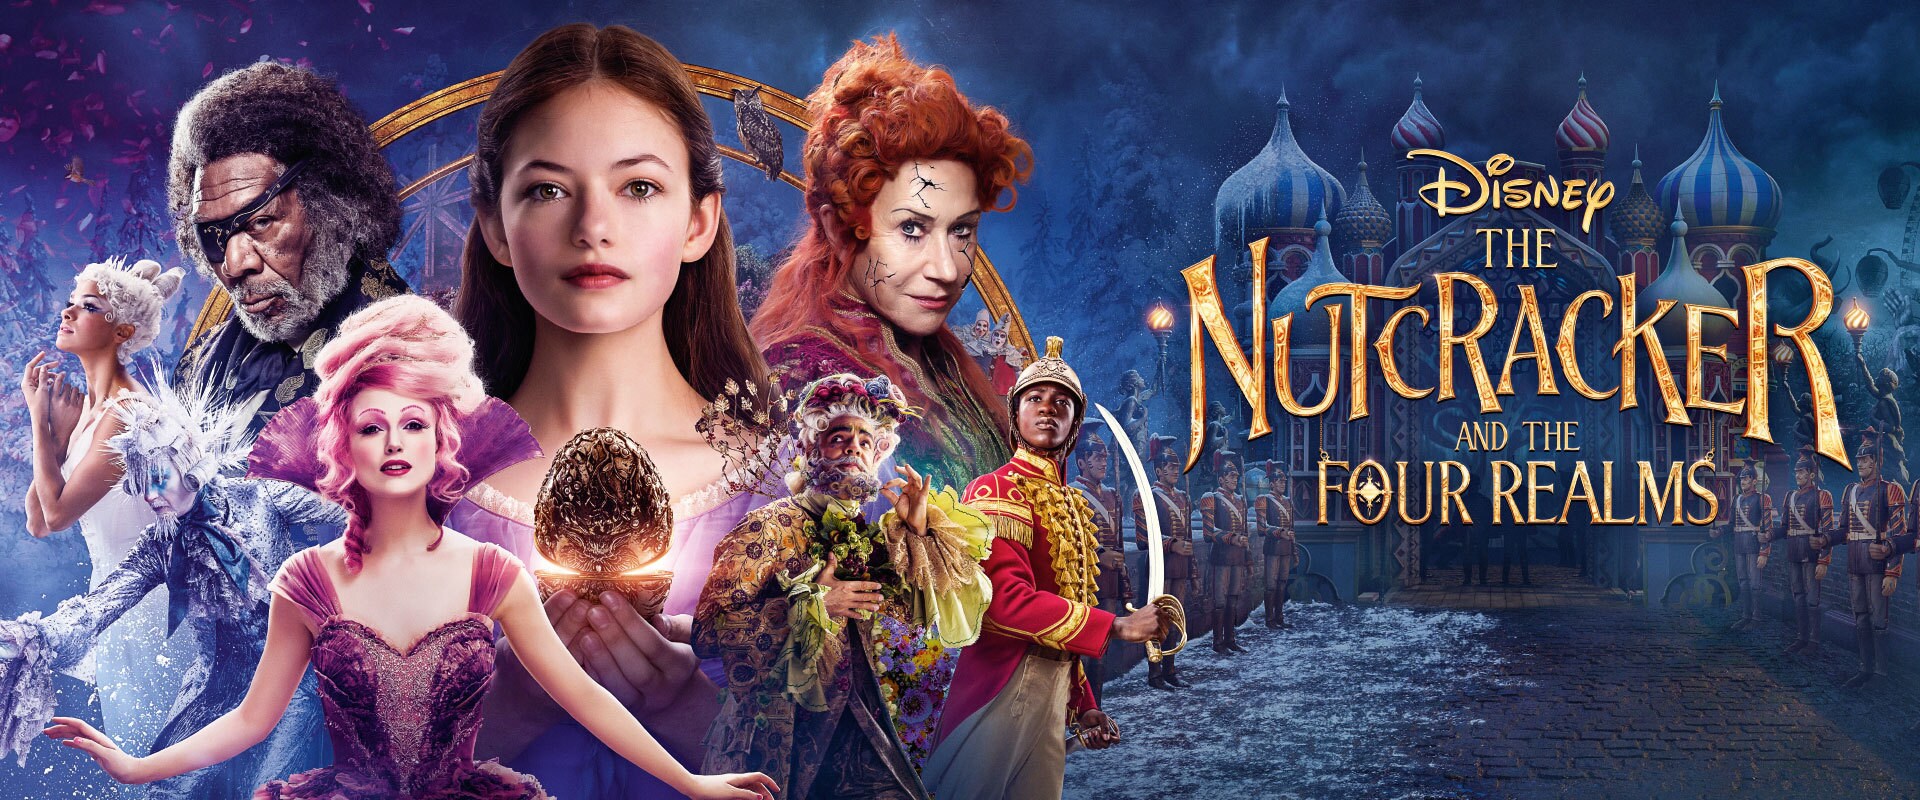 "Christmas Movie"
3. "The Nutcracker and the Four Realms" - wide 7